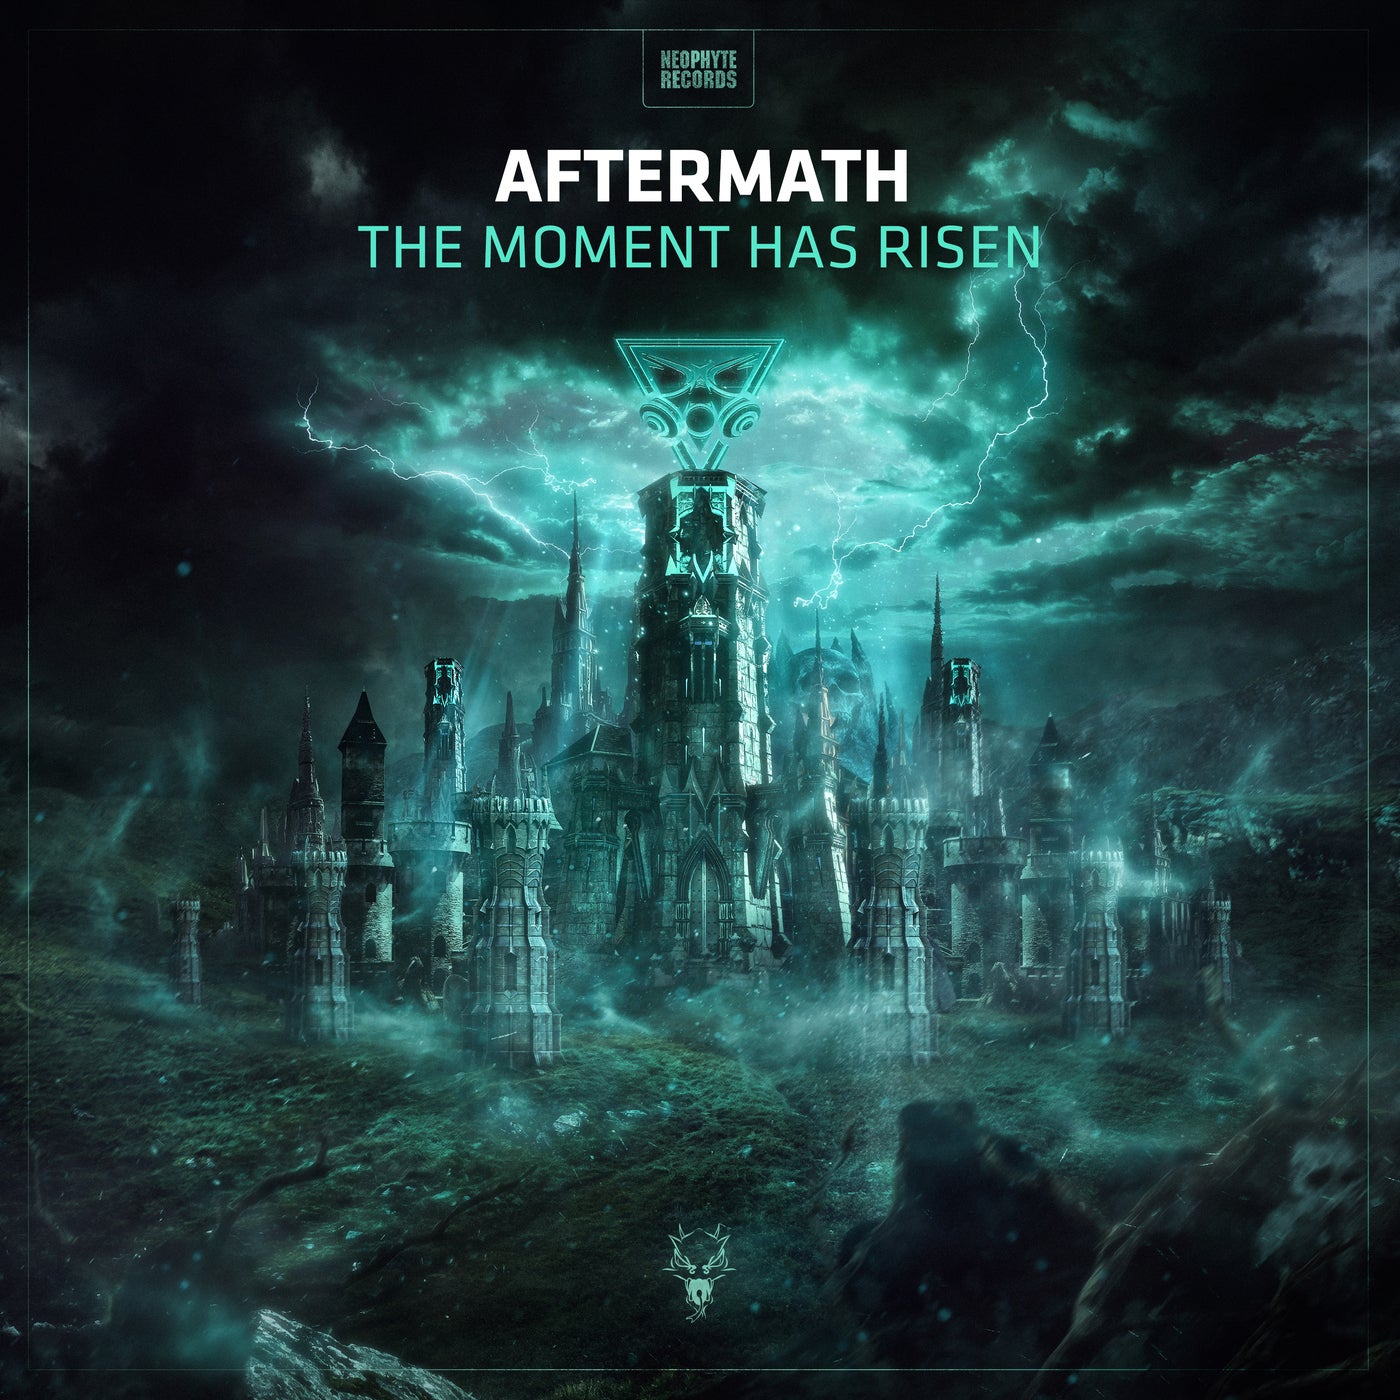 The Moment Has Risen - Extended Version